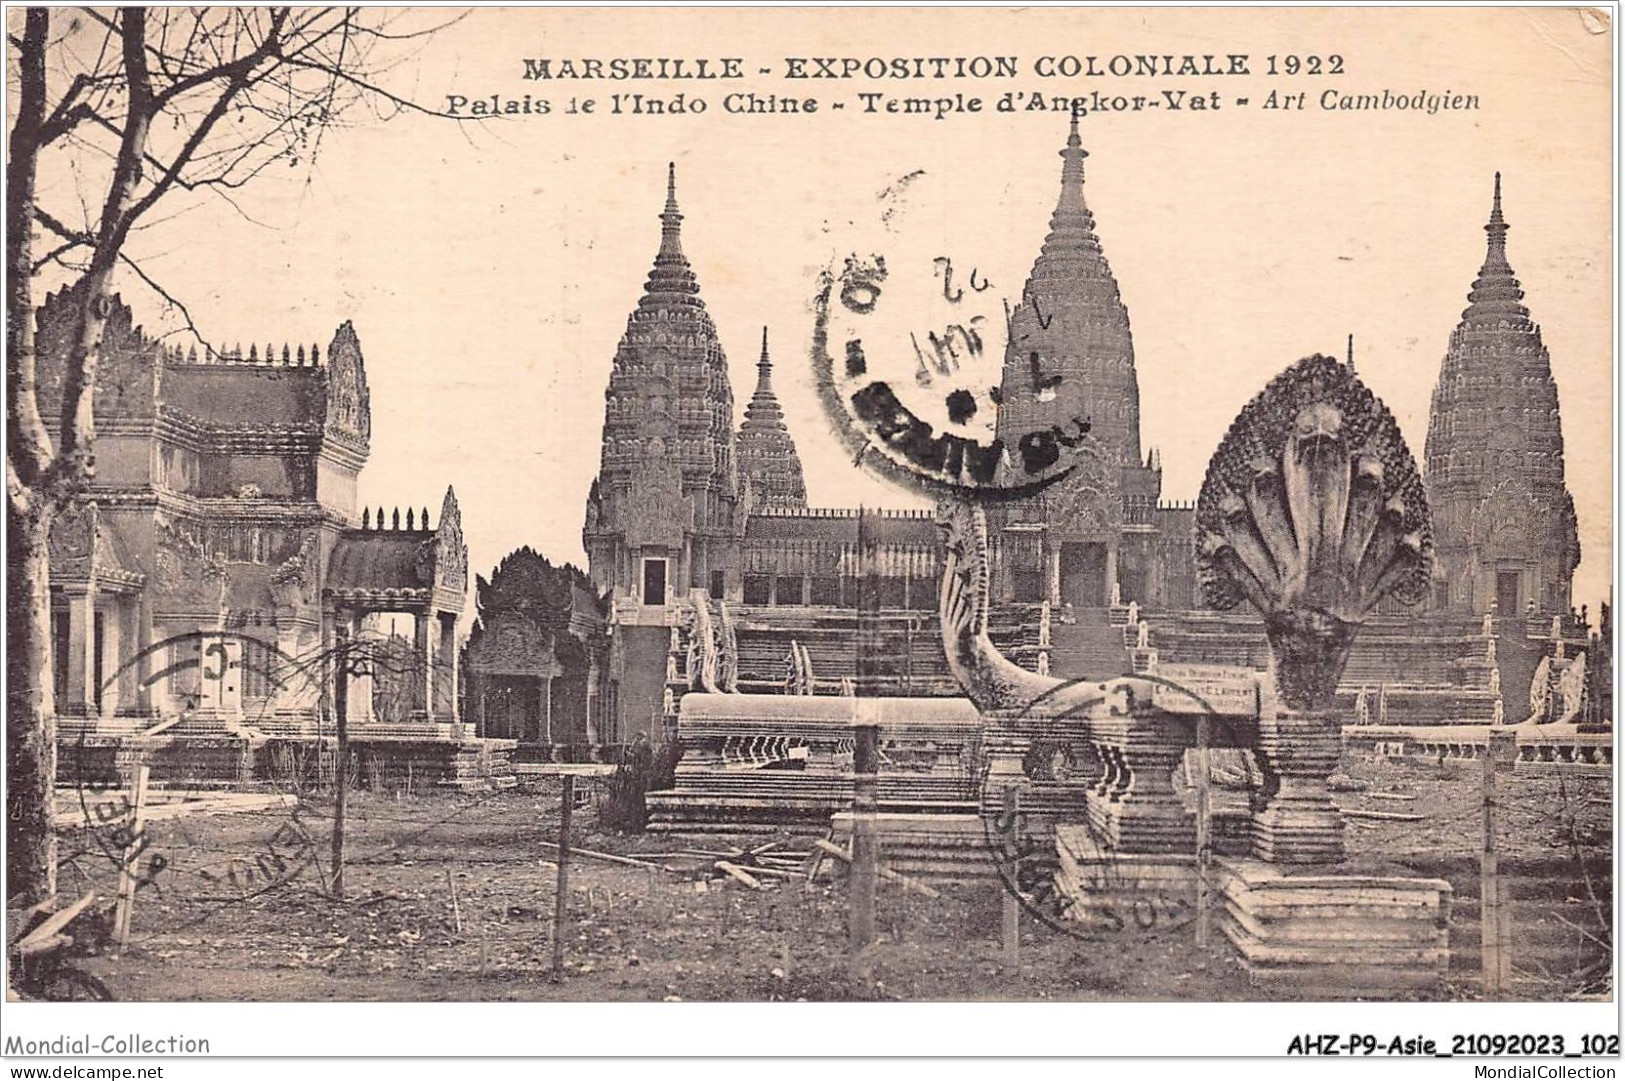 AHZP9-ASIE-0808 - MARSEILLE - EXPOSITION COLONIALE 1922 - PALAIS DE L'INDO-CHINE - TEMPLE D'ANGKOR-VAT CAMBODGE - Cambodia